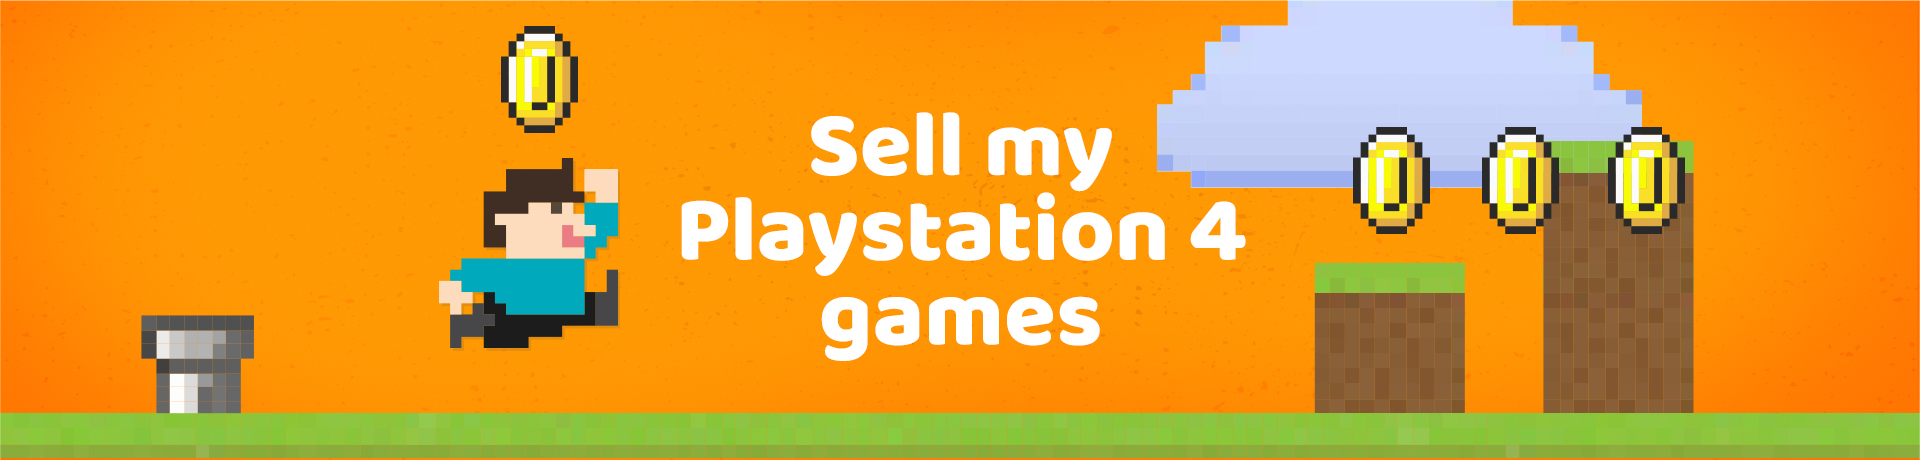 Sell PS4 games